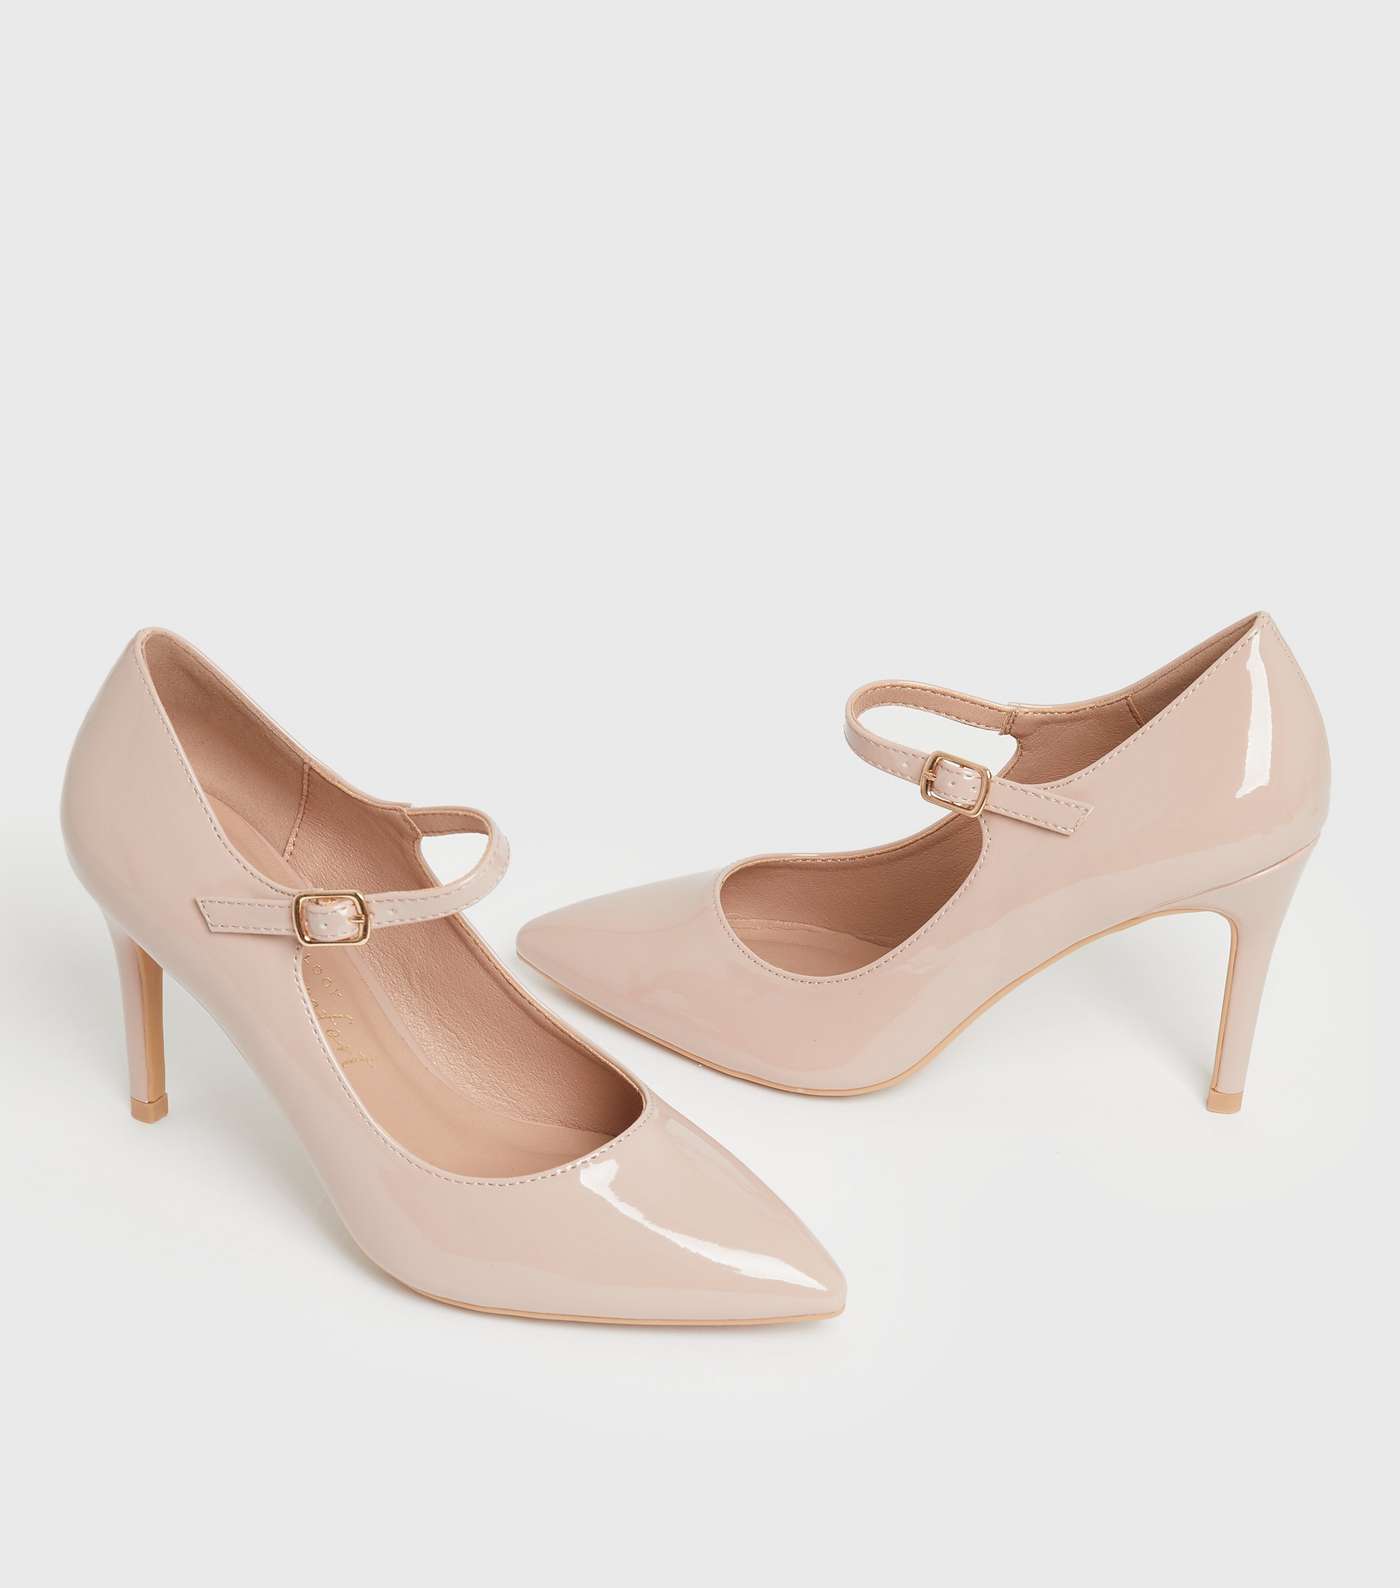 Pale Pink Patent Buckle Stiletto Heel Court Shoes Image 3